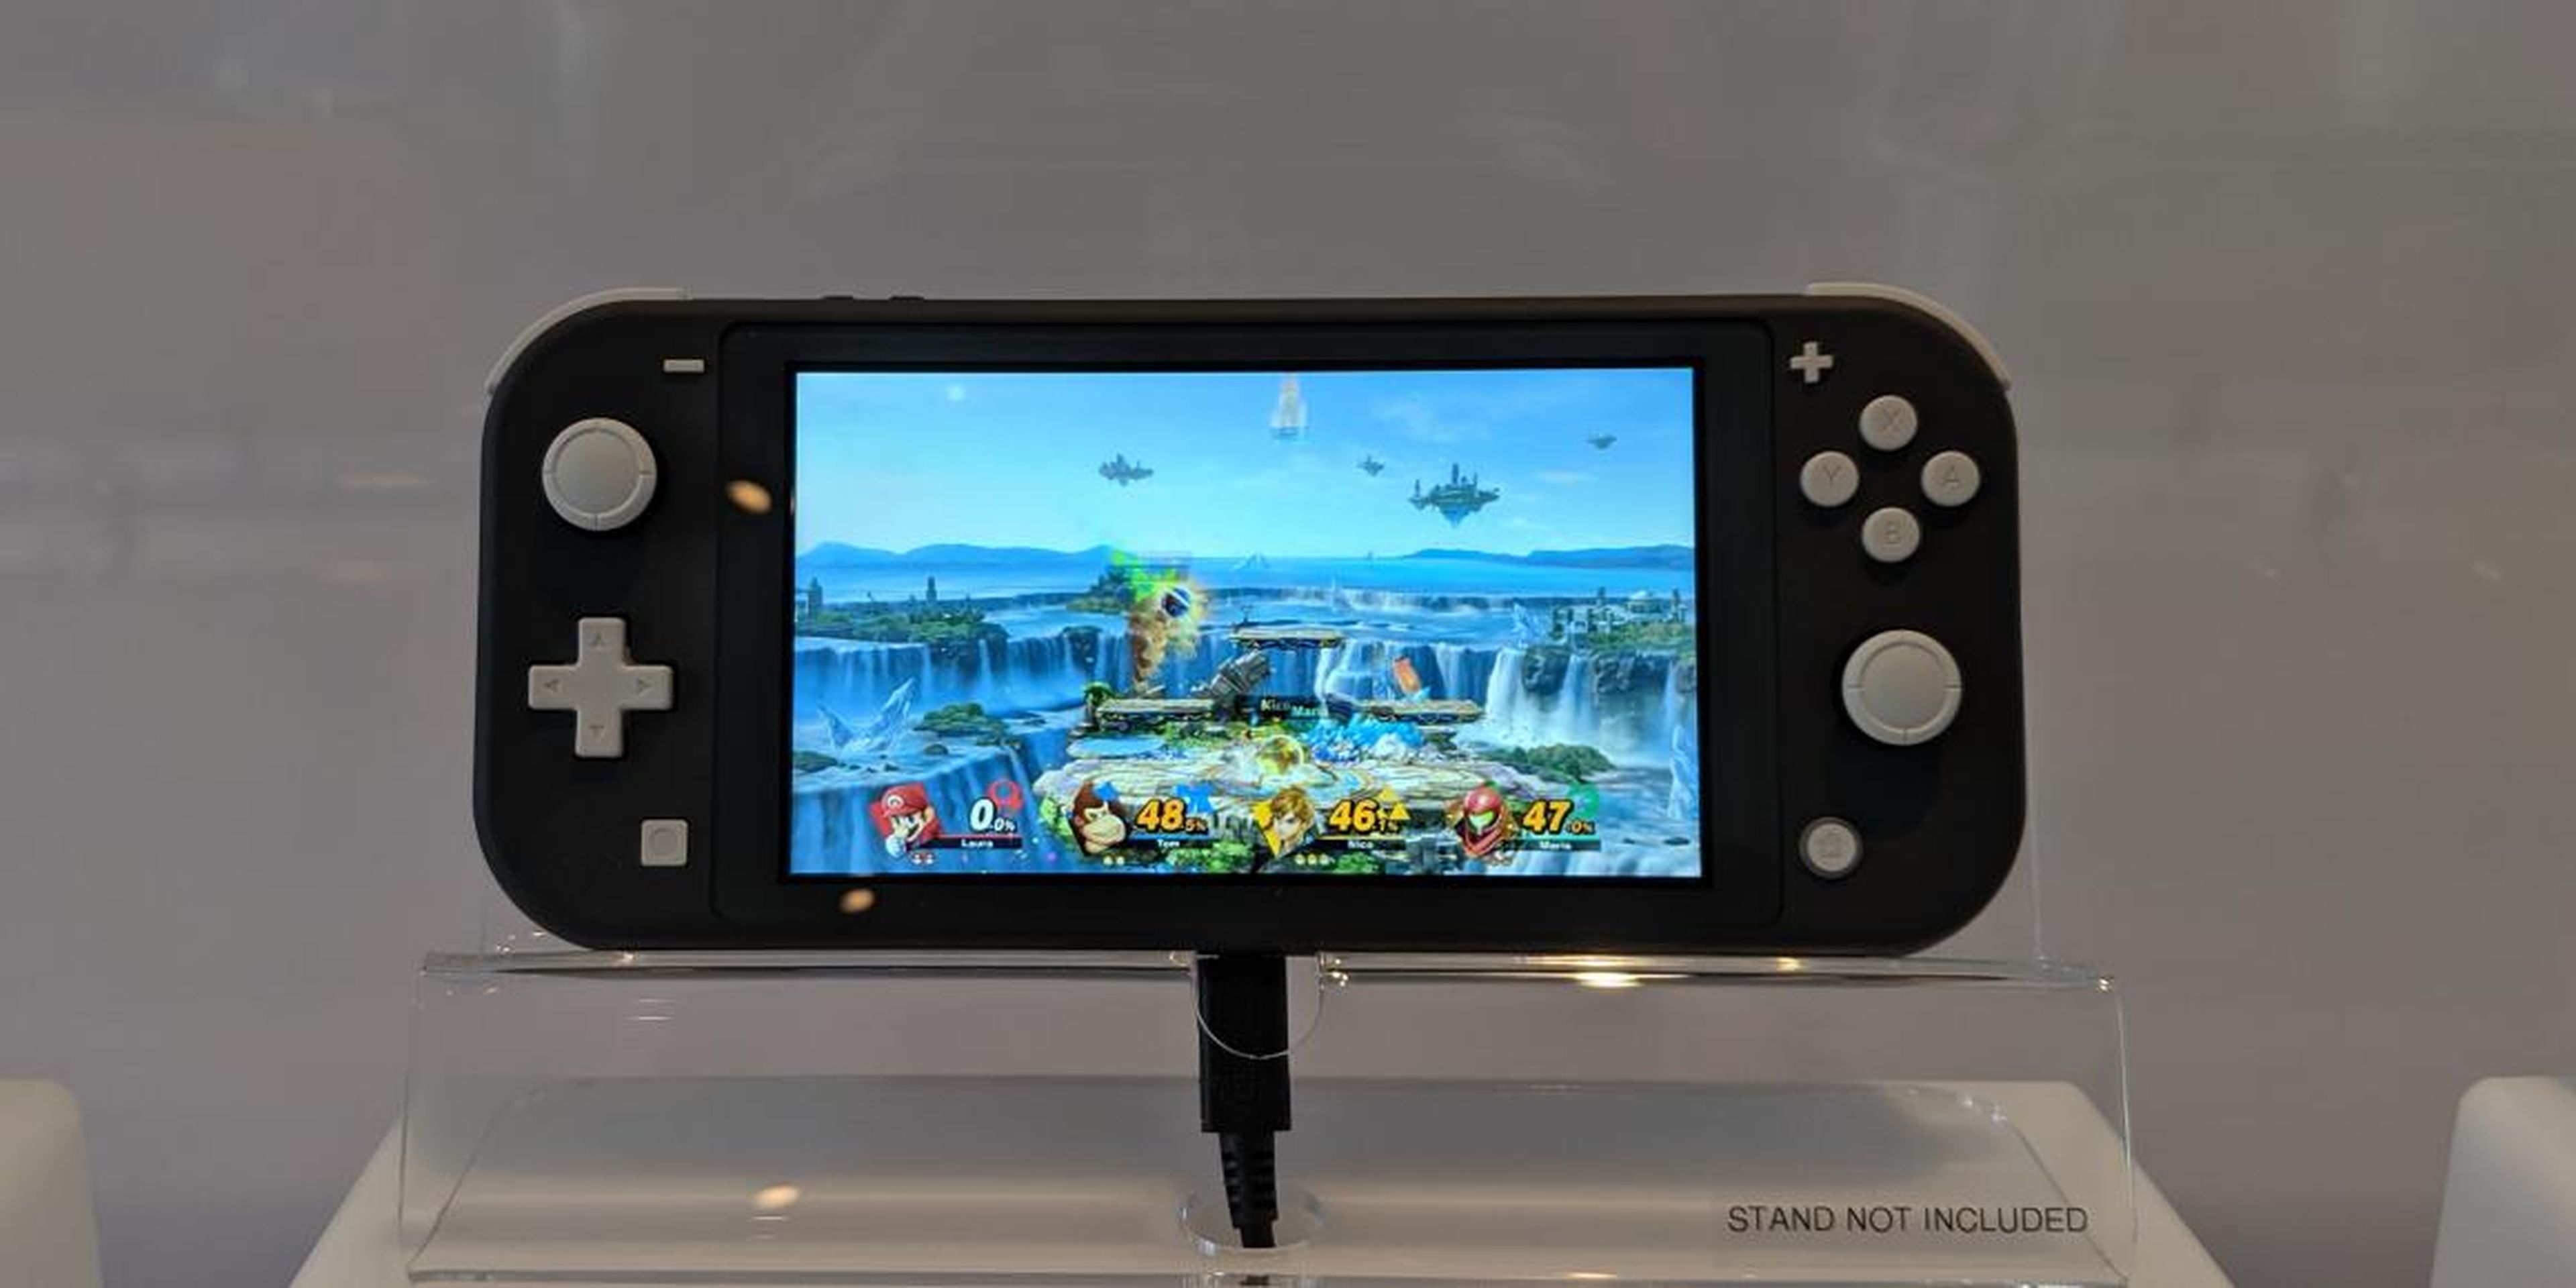 The gray Nintendo Switch Lite is bit darker than the original Switch, and is closer in color to more traditional electronics.